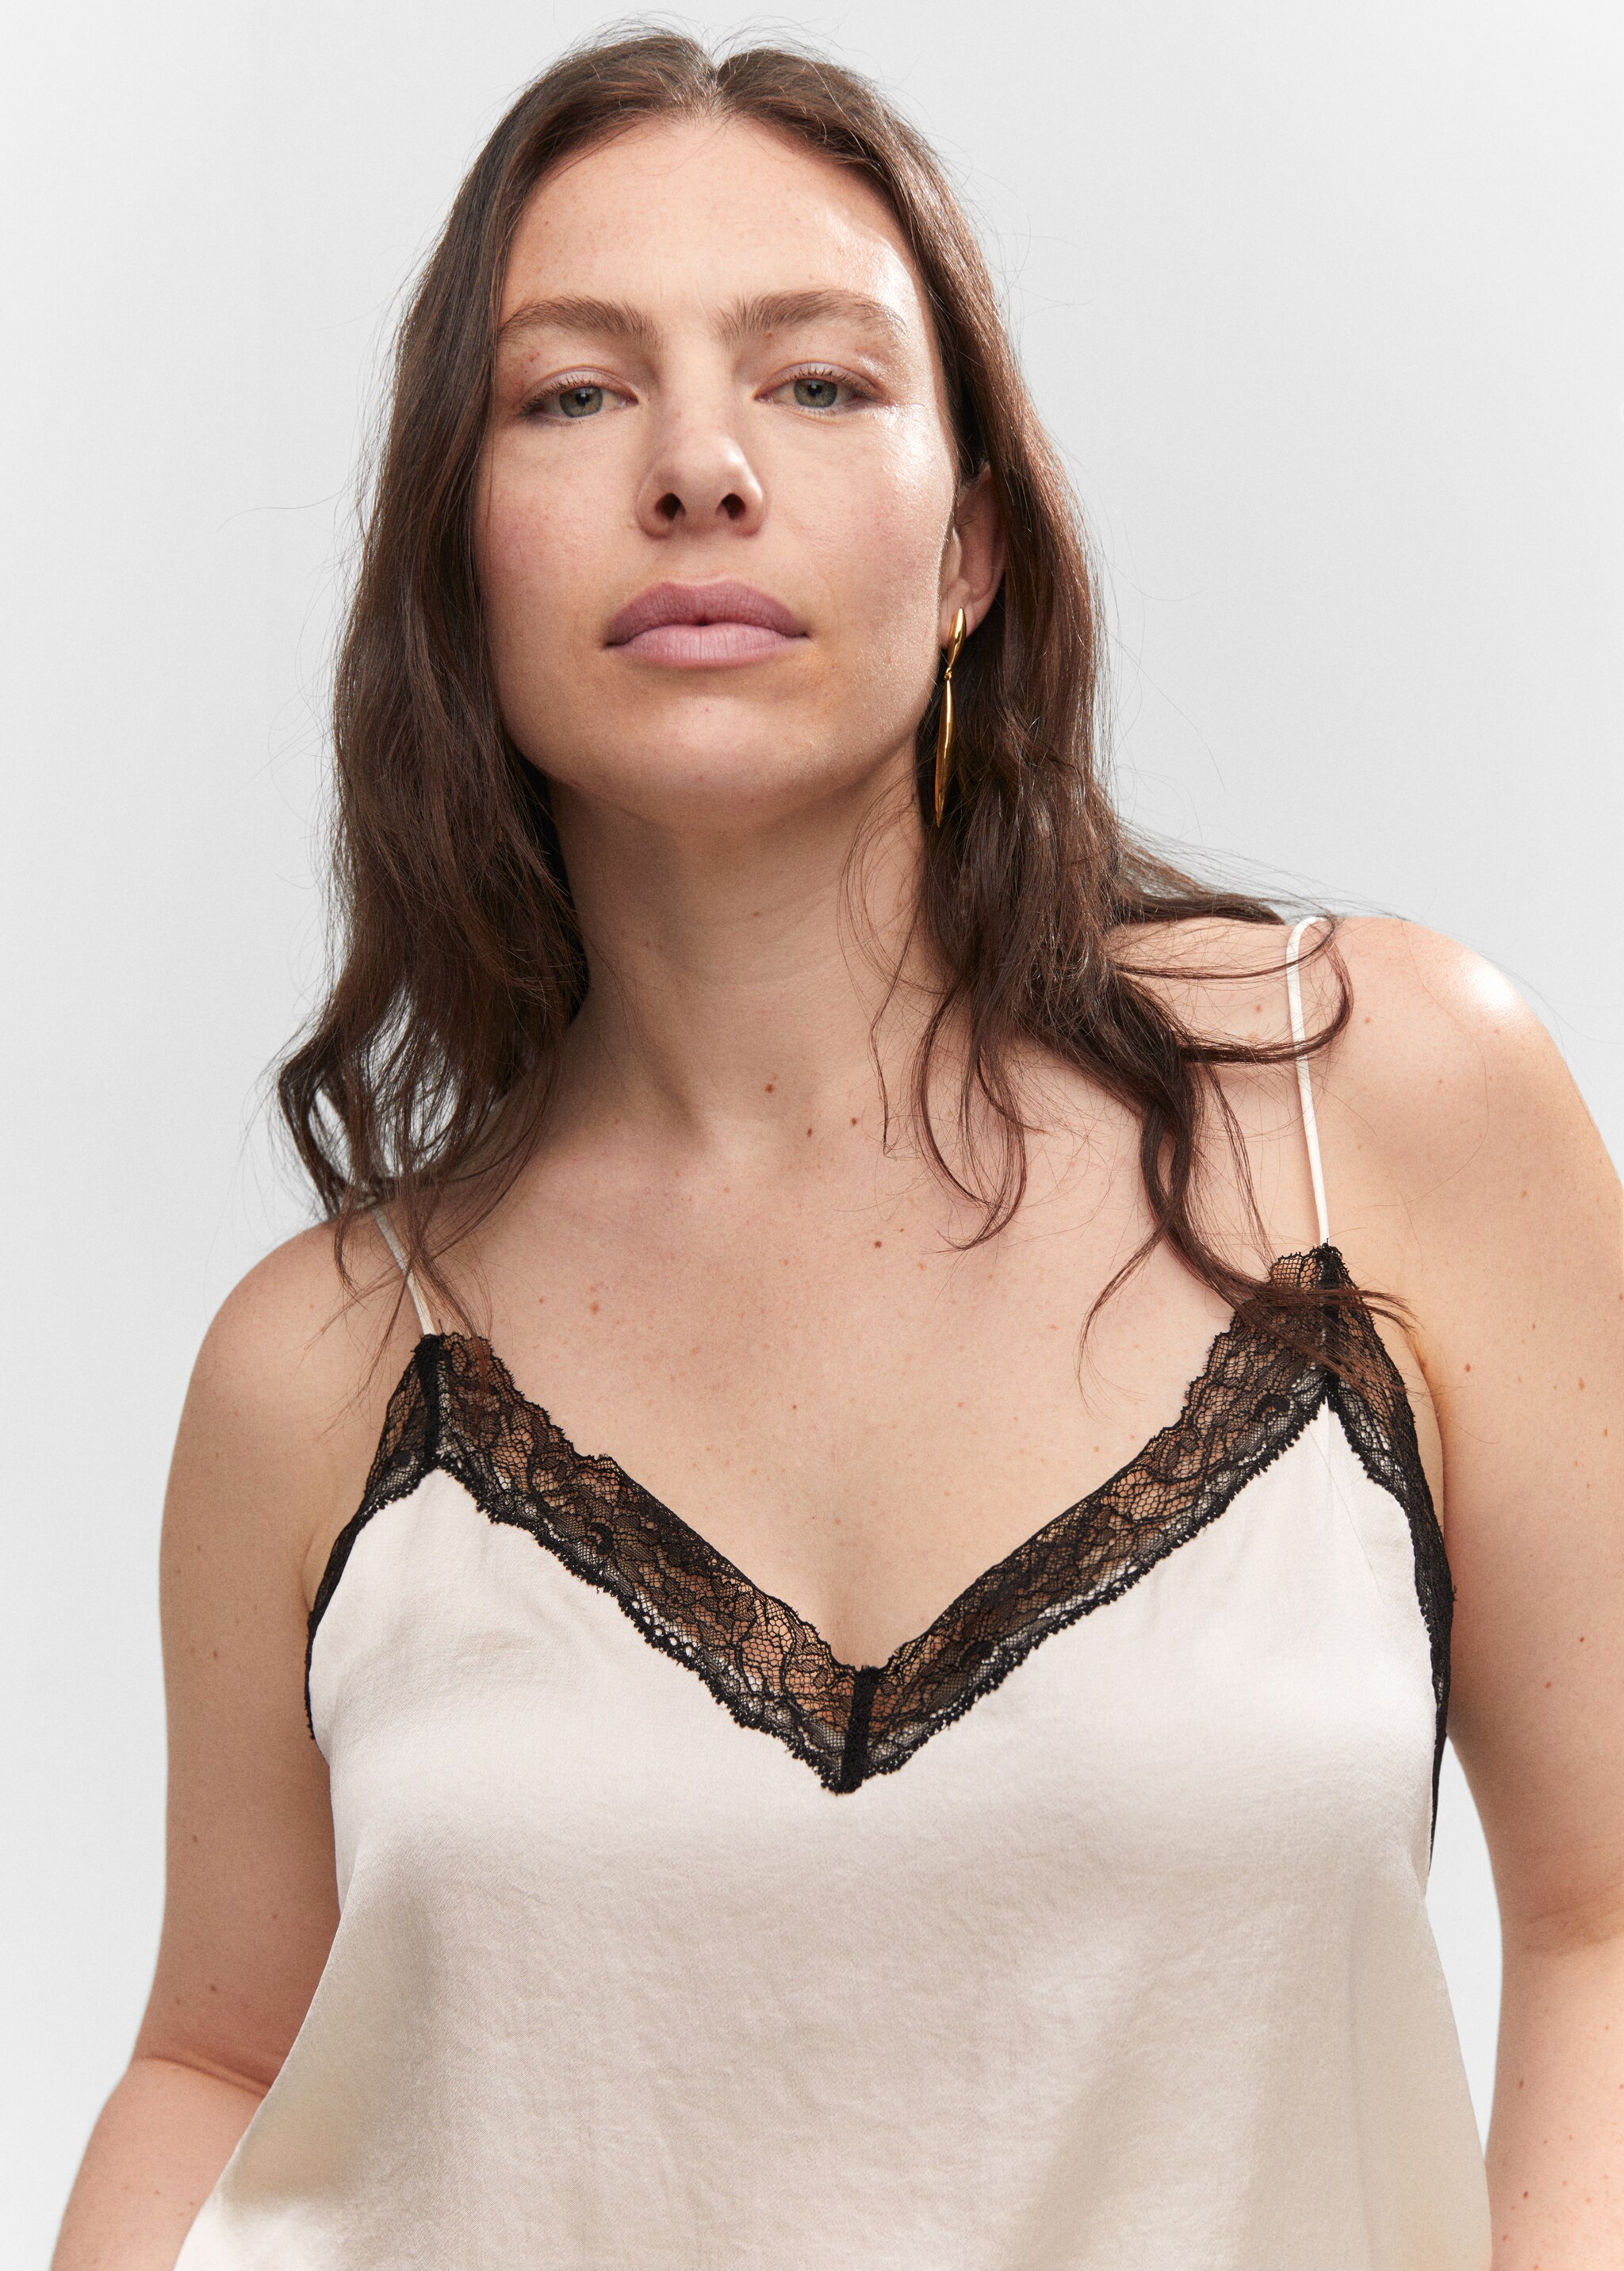 Lace top - Details of the article 4